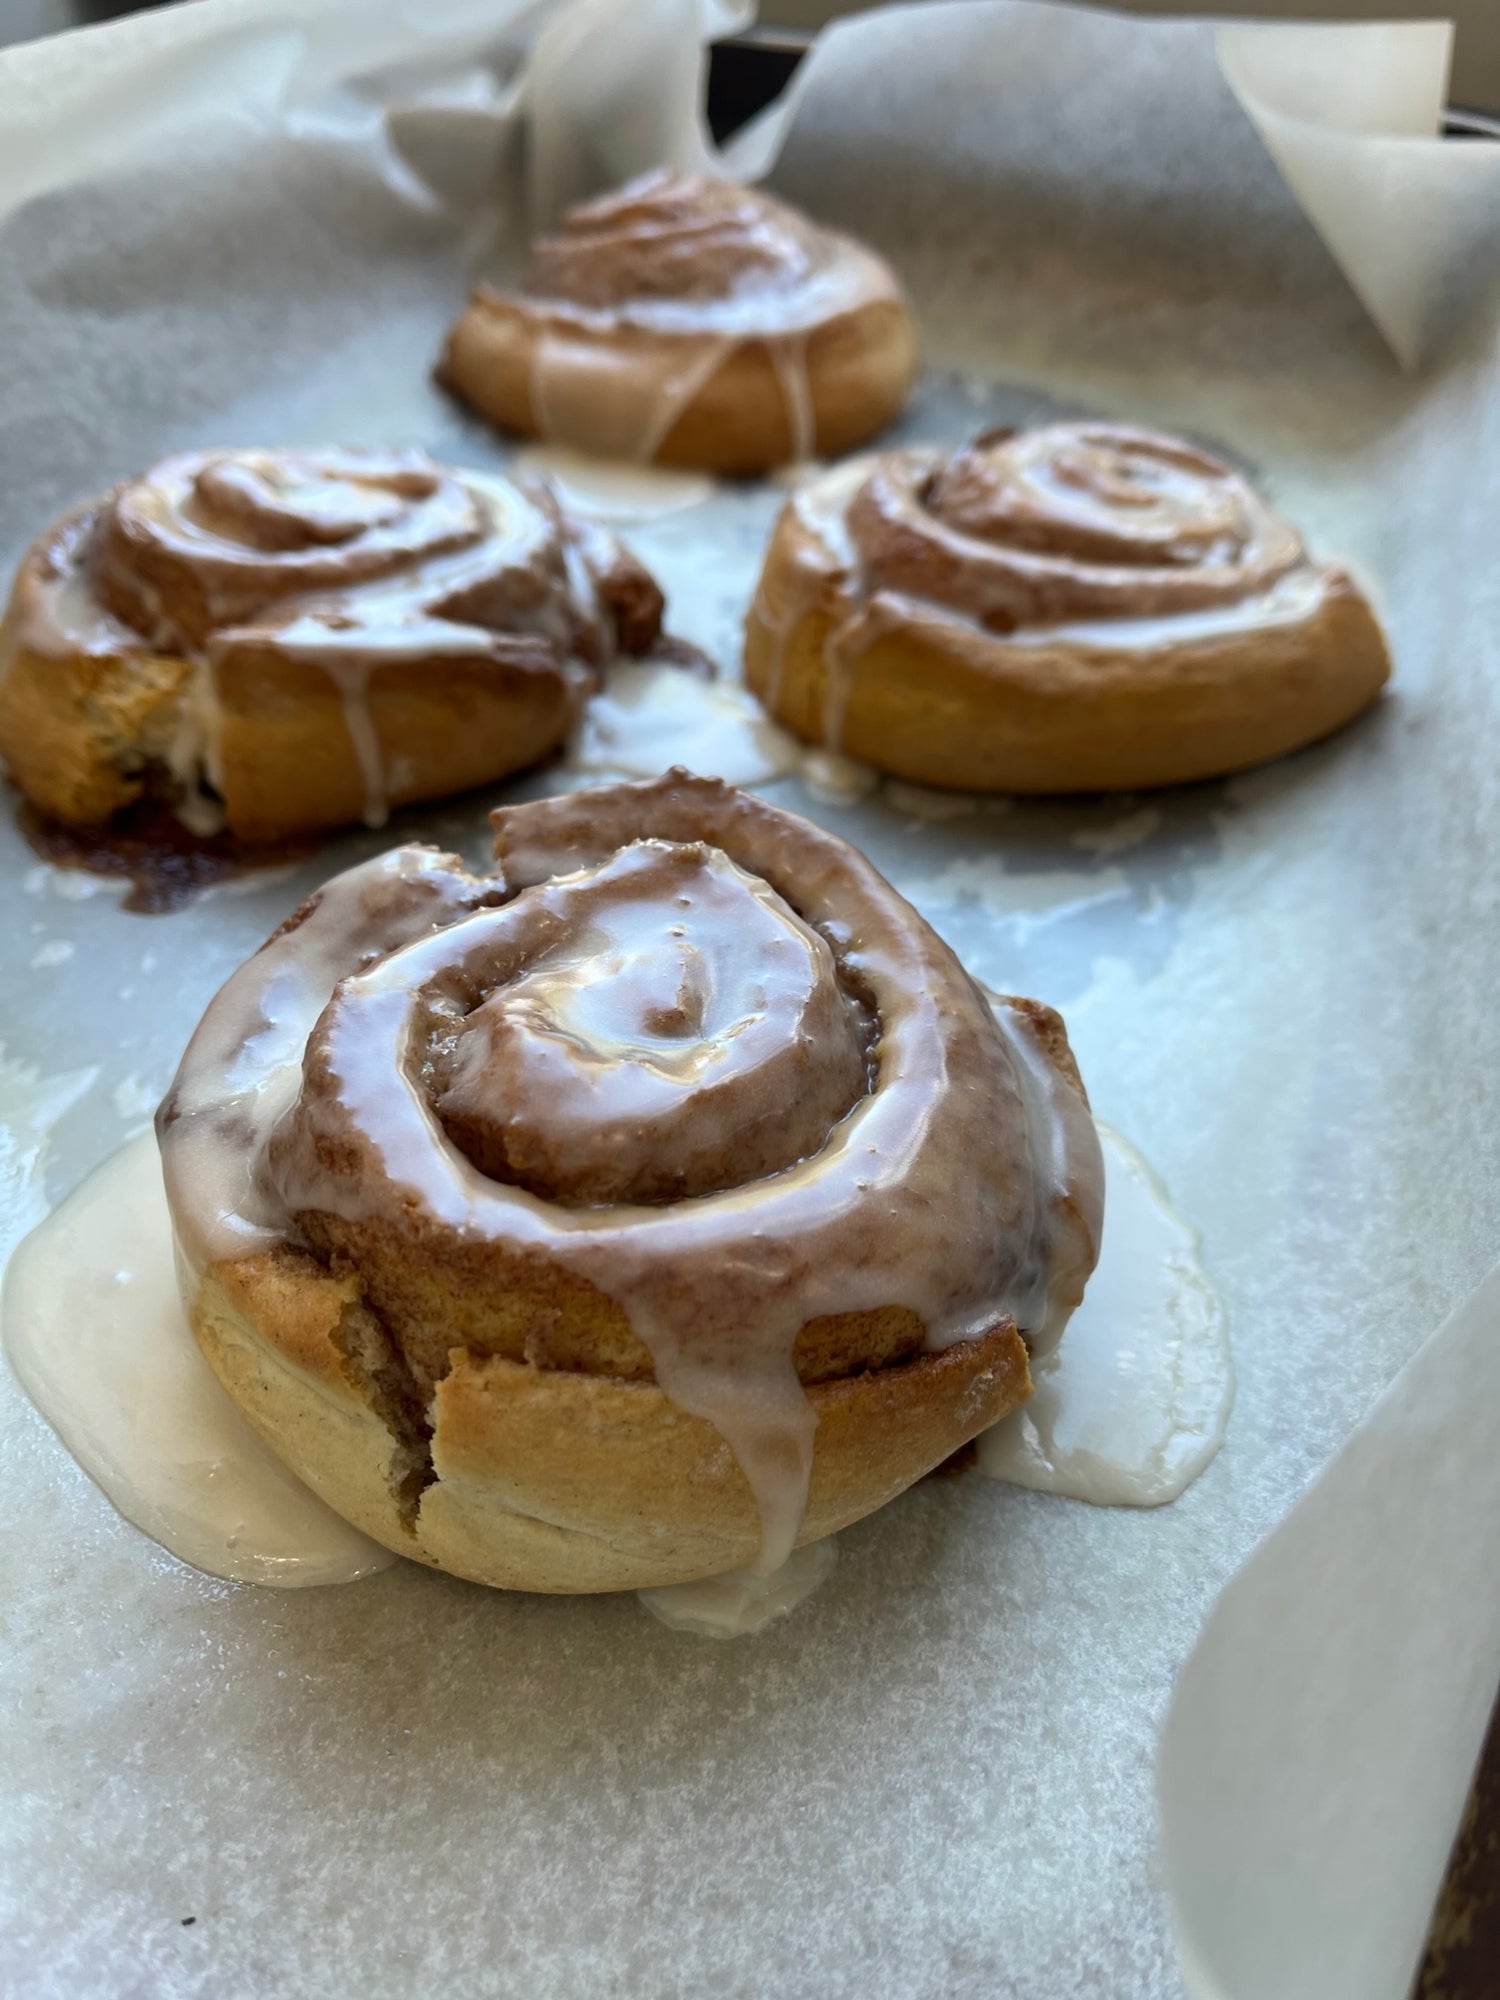 Sweet Rolls (Old Fashioned Yeast Rolls) l Beyond Frosting